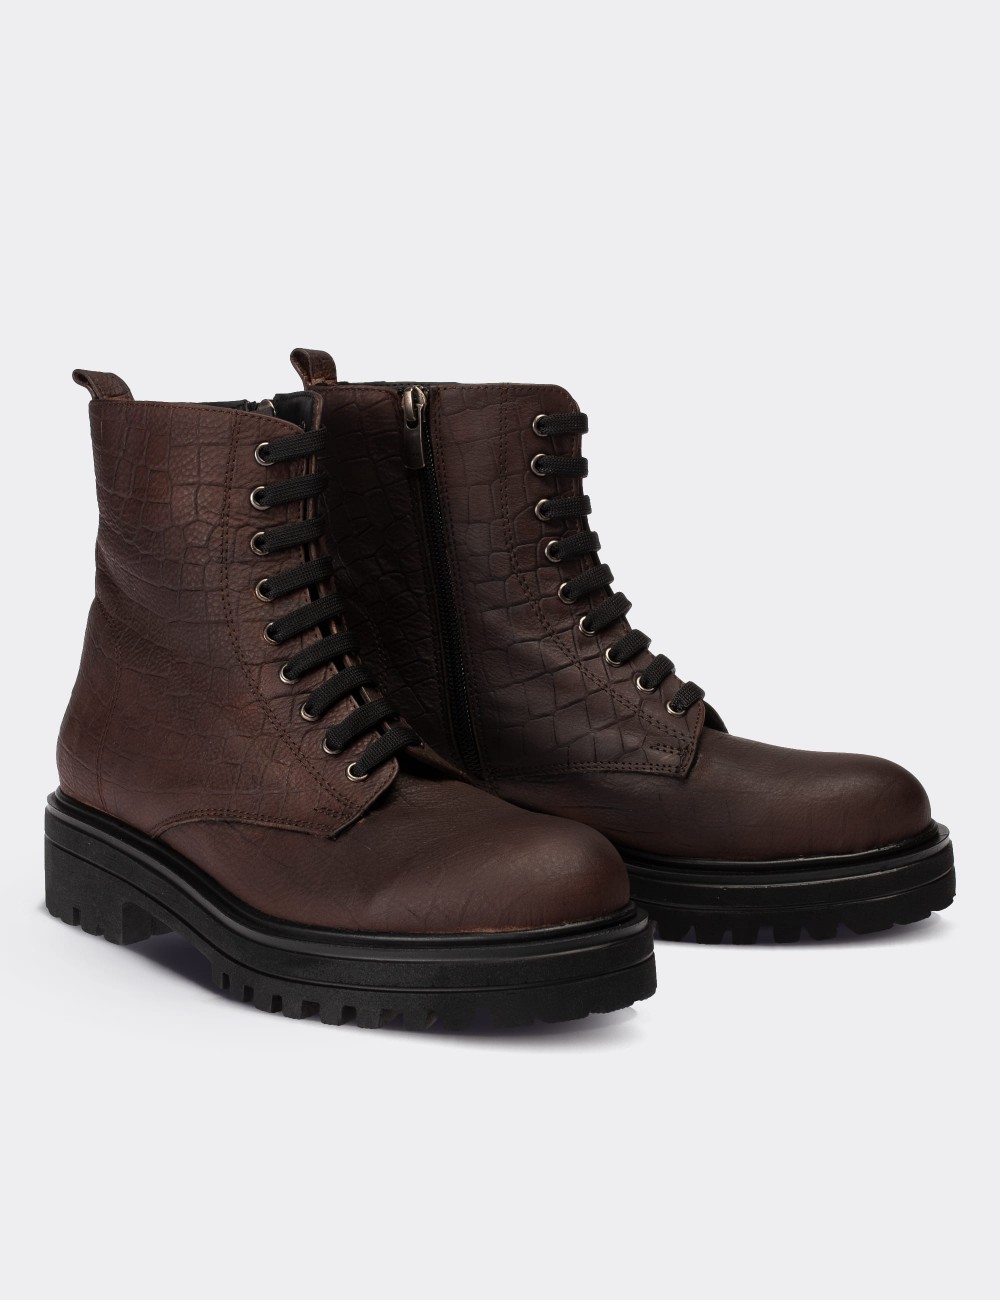 Brown  Leather Postal Boots - 01814ZKHVE08